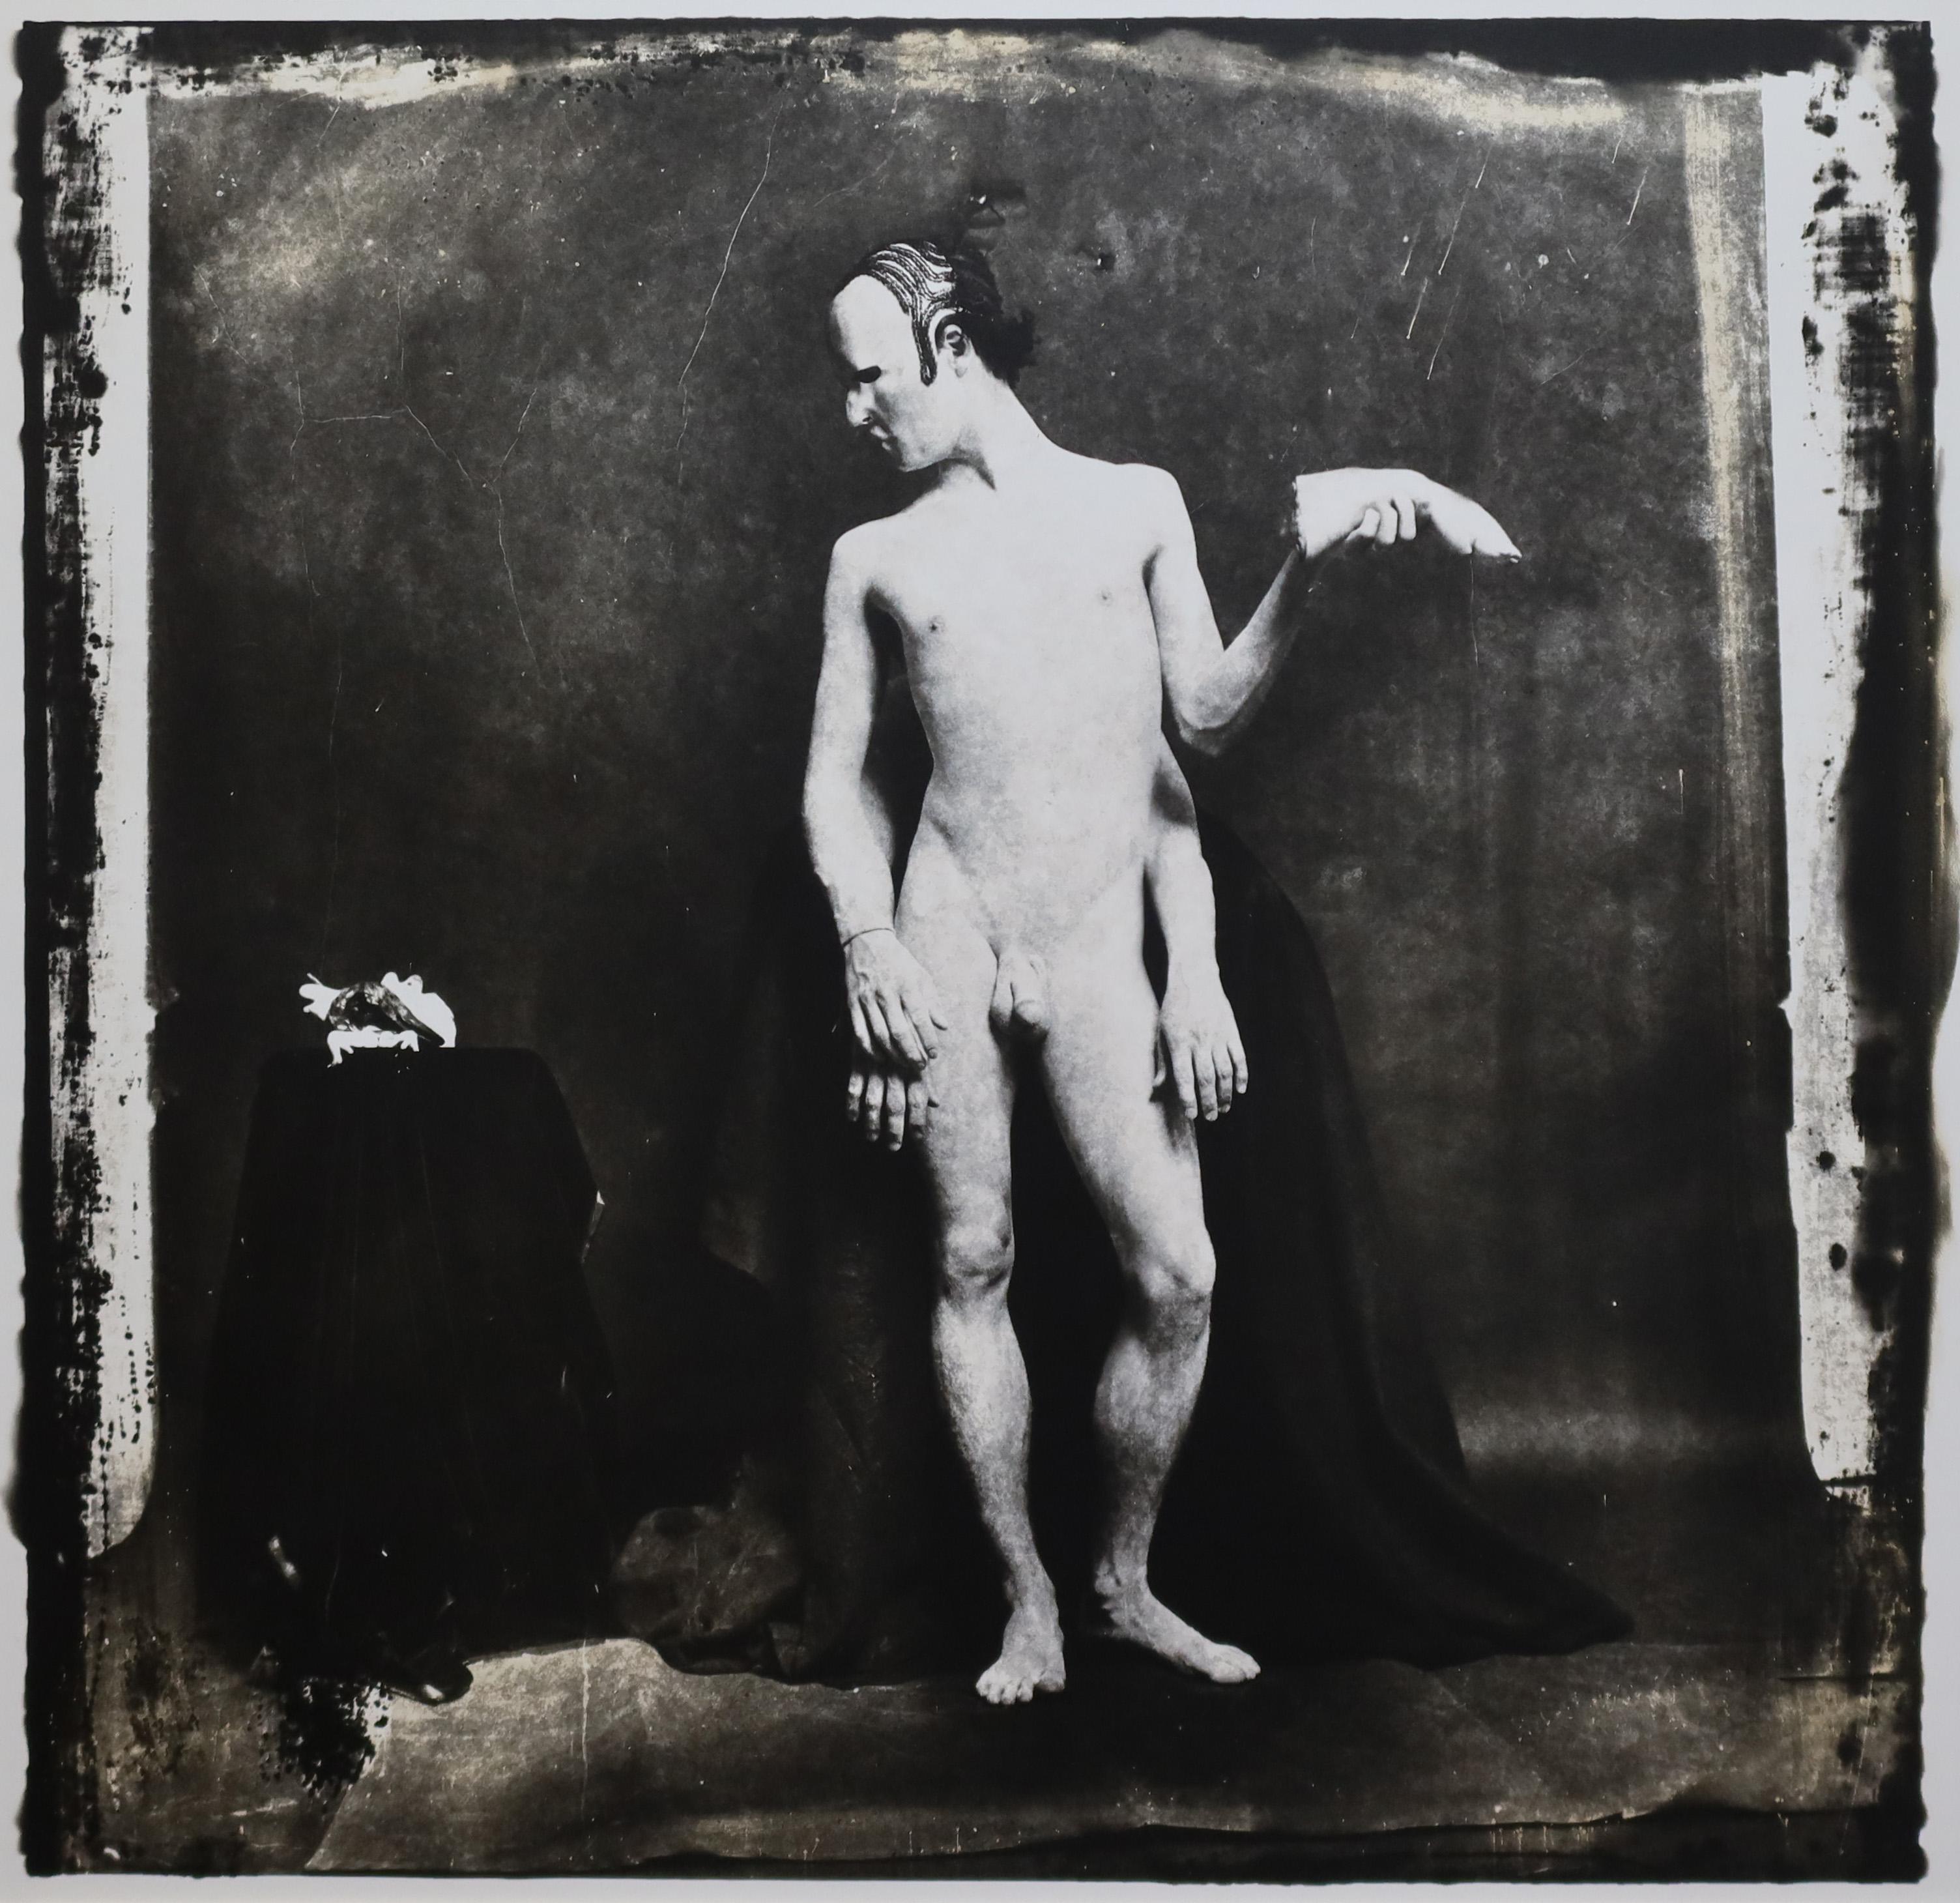 Up for sale is an original Joel-Peter Witkin photograph.  It’s an original photograph, Edition 1 of 15

Guggenheim Museum Provenance and also sold through Sotheby’s 2012

The Boy with Four Arms, San Francisco (Il Ragazzo Con Quattro Bracci)"